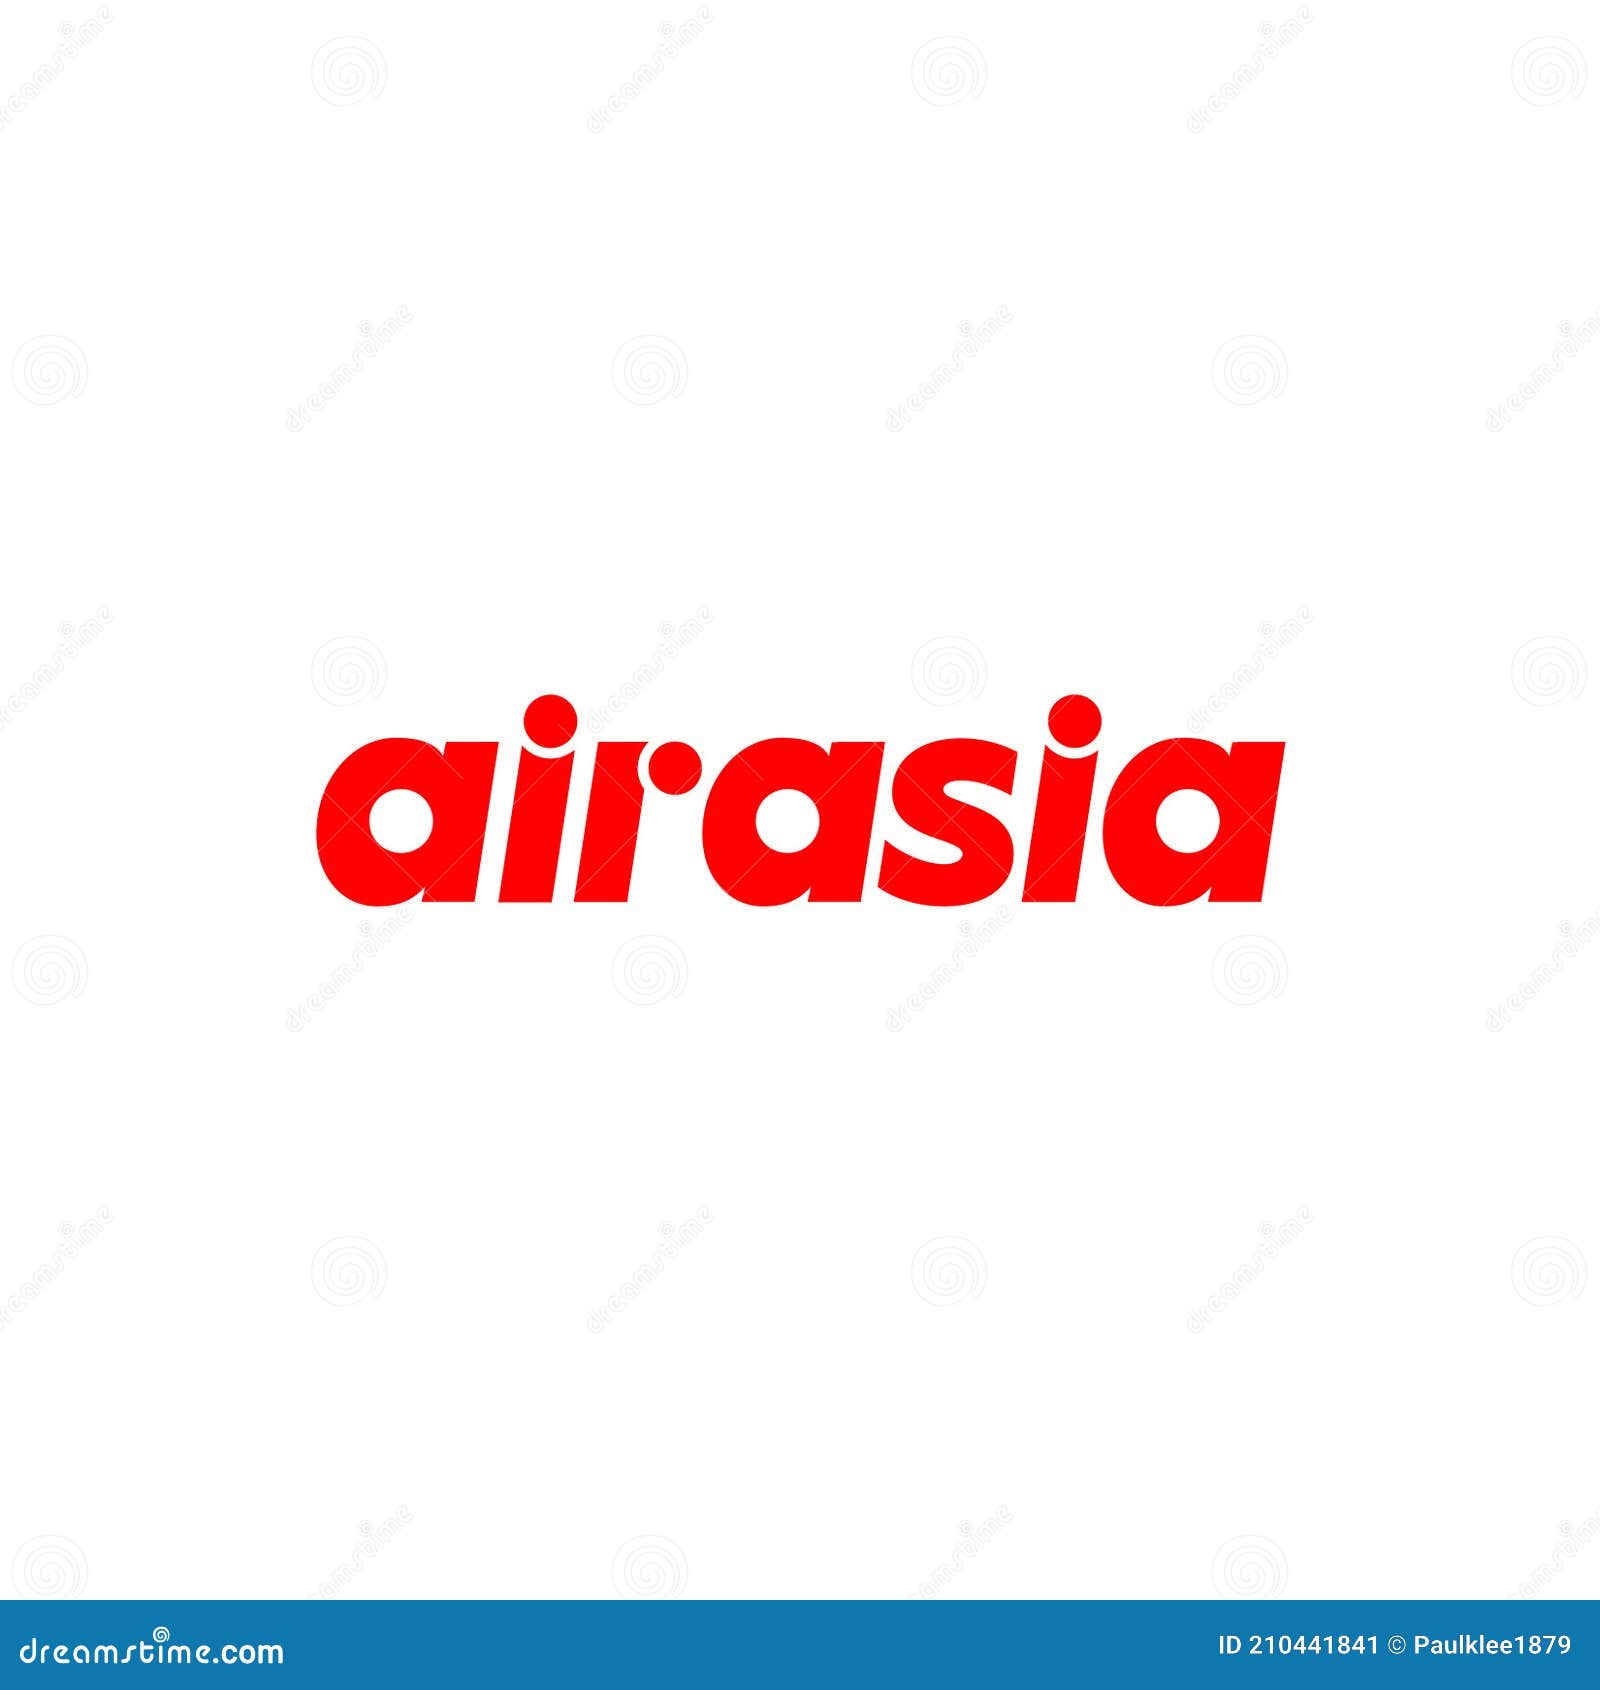 More investment and job opportunities for Filipinos as Capital A's Tony  Fernandes sees growth for AirAsia Philippines — airasia newsroom